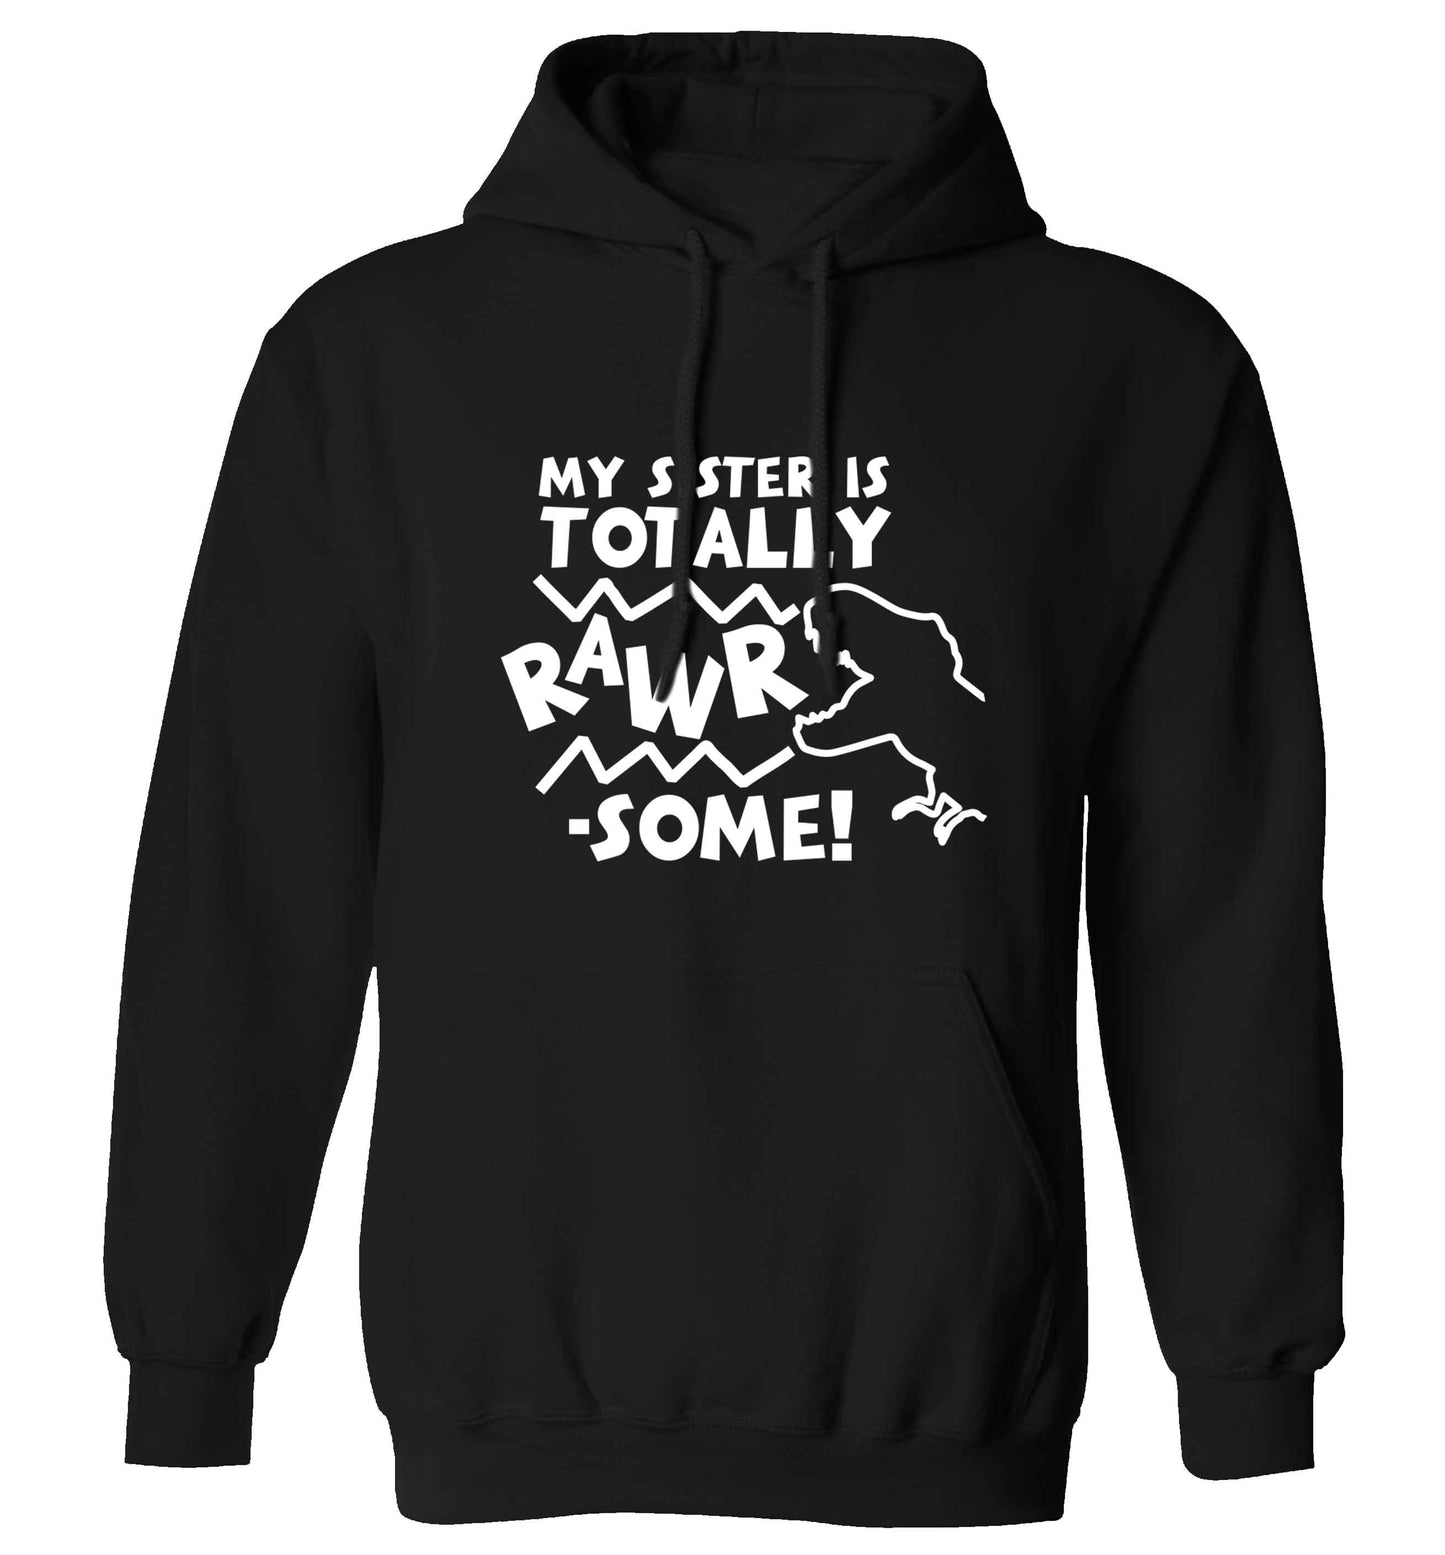 My sister is totally rawrsome adults unisex black hoodie 2XL